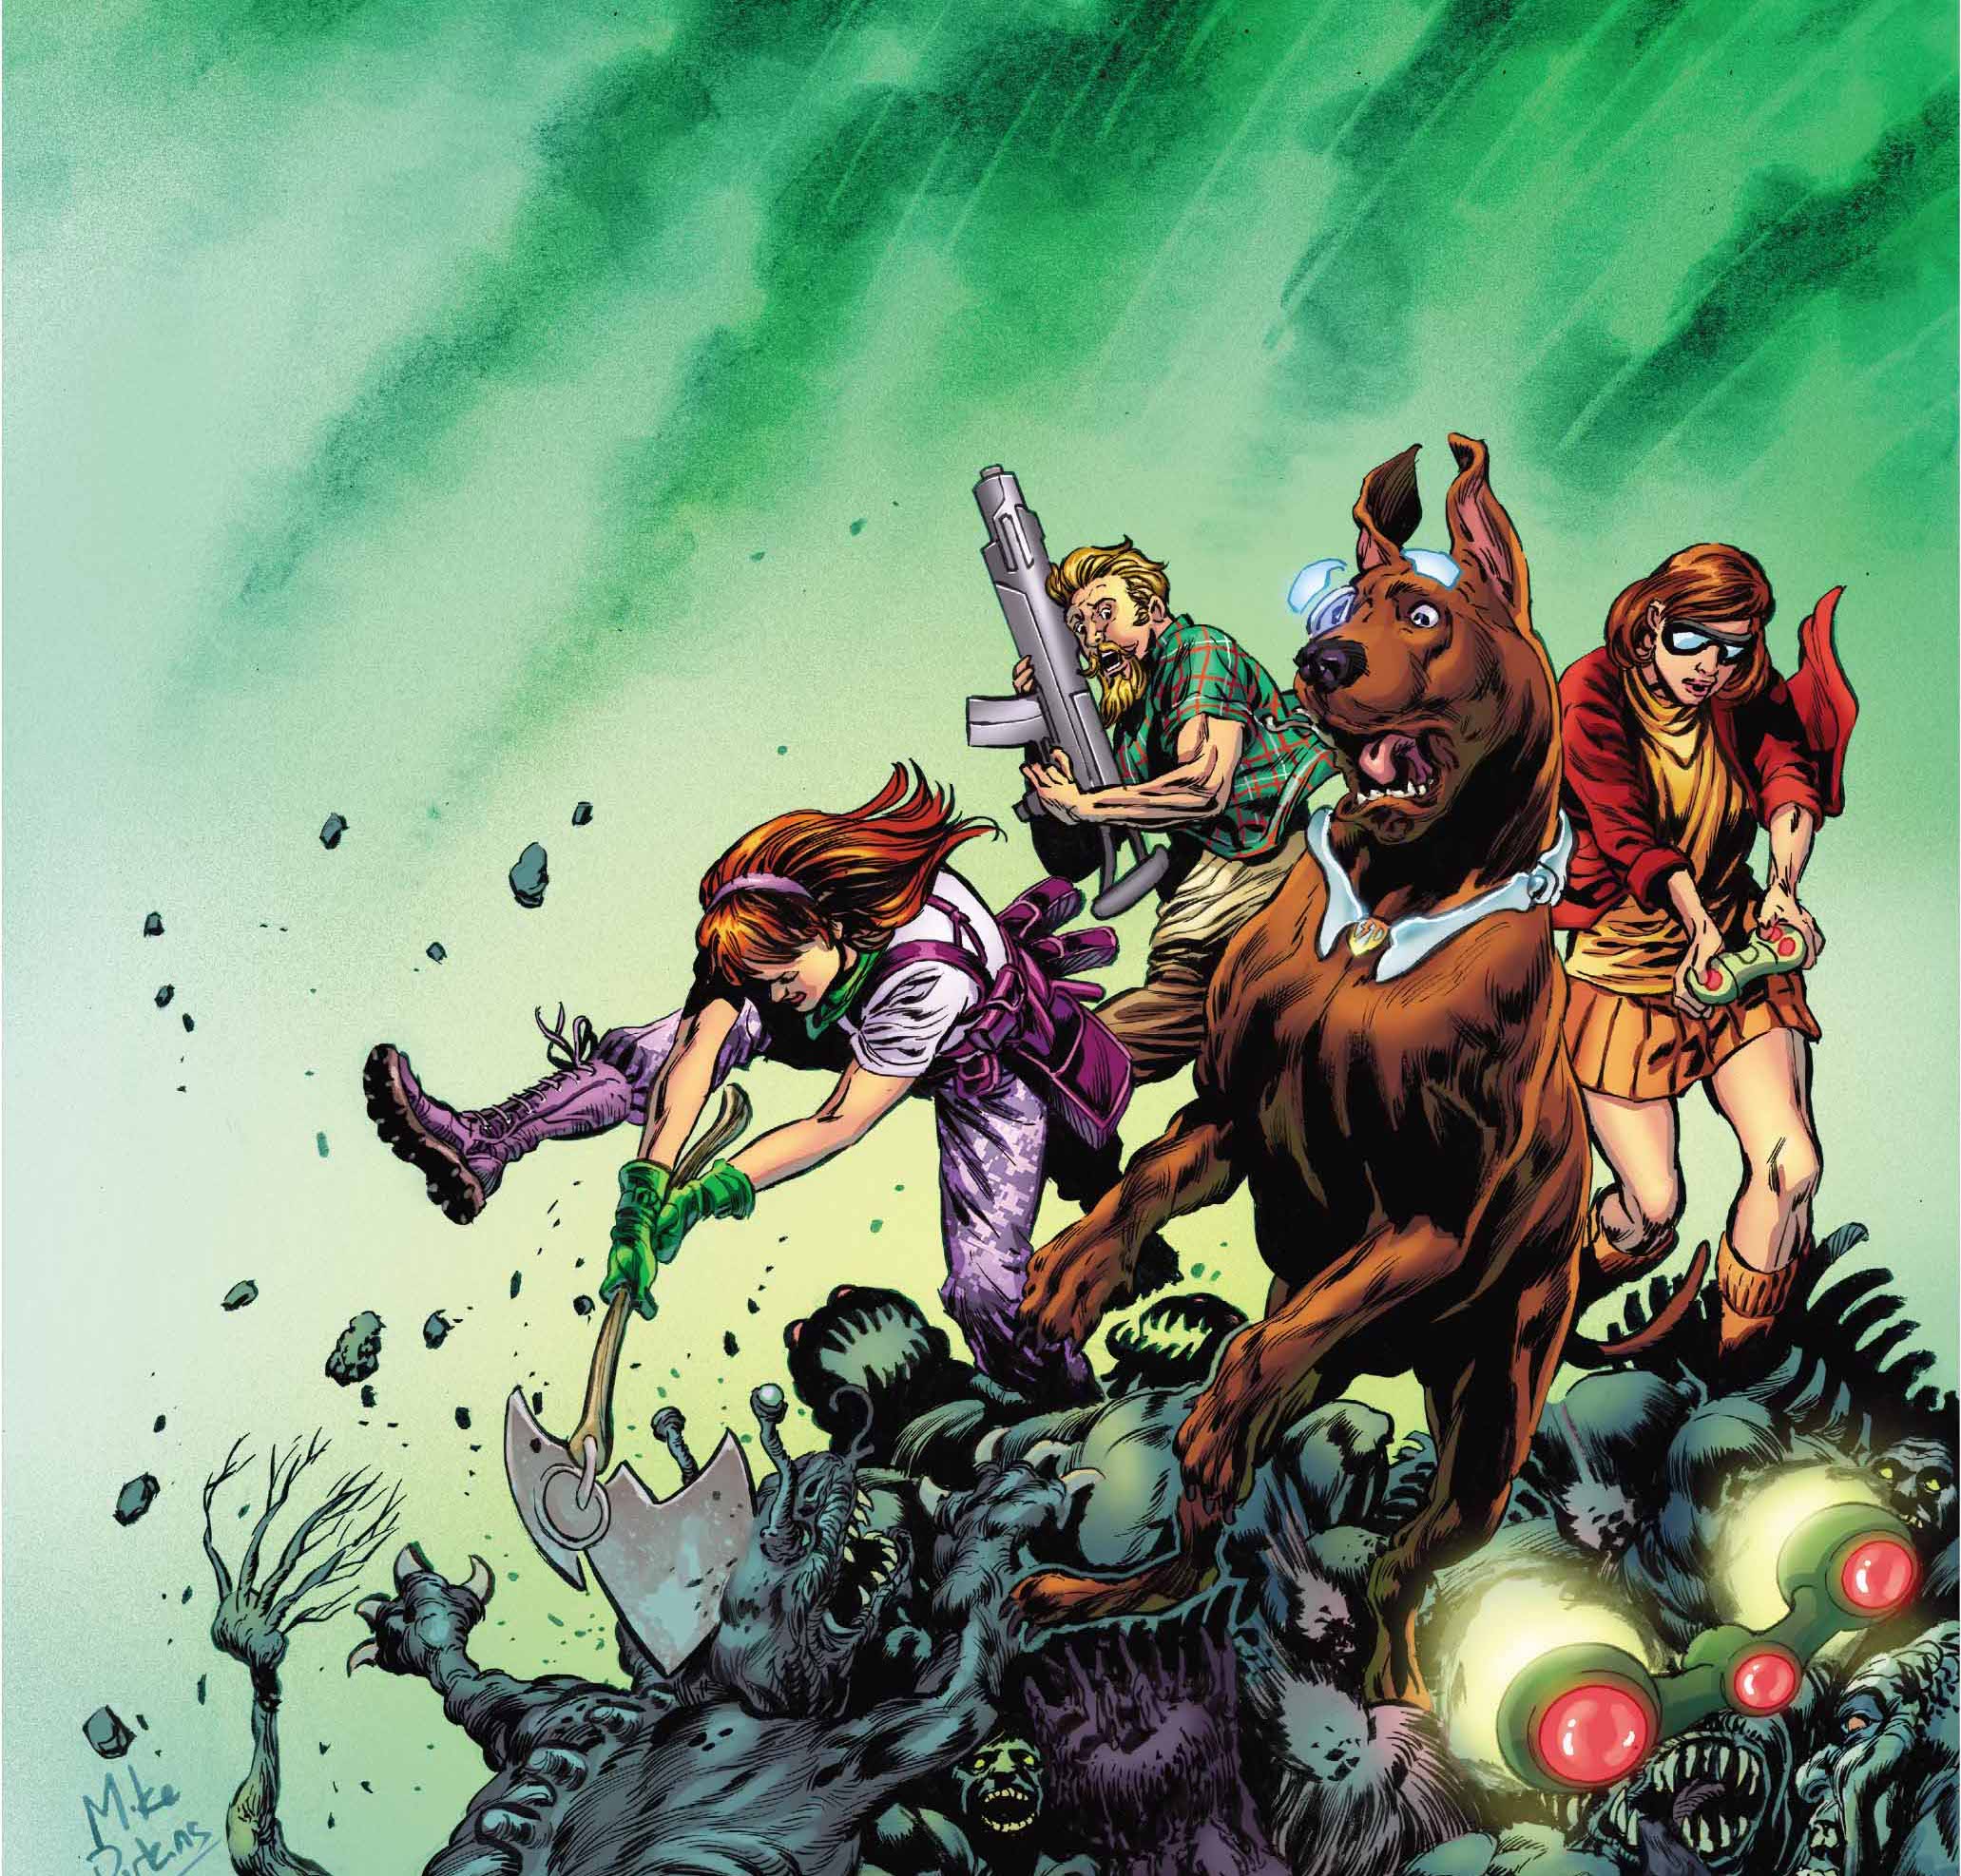 [EXCLUSIVE] DC Preview: Scooby Apocalypse #26